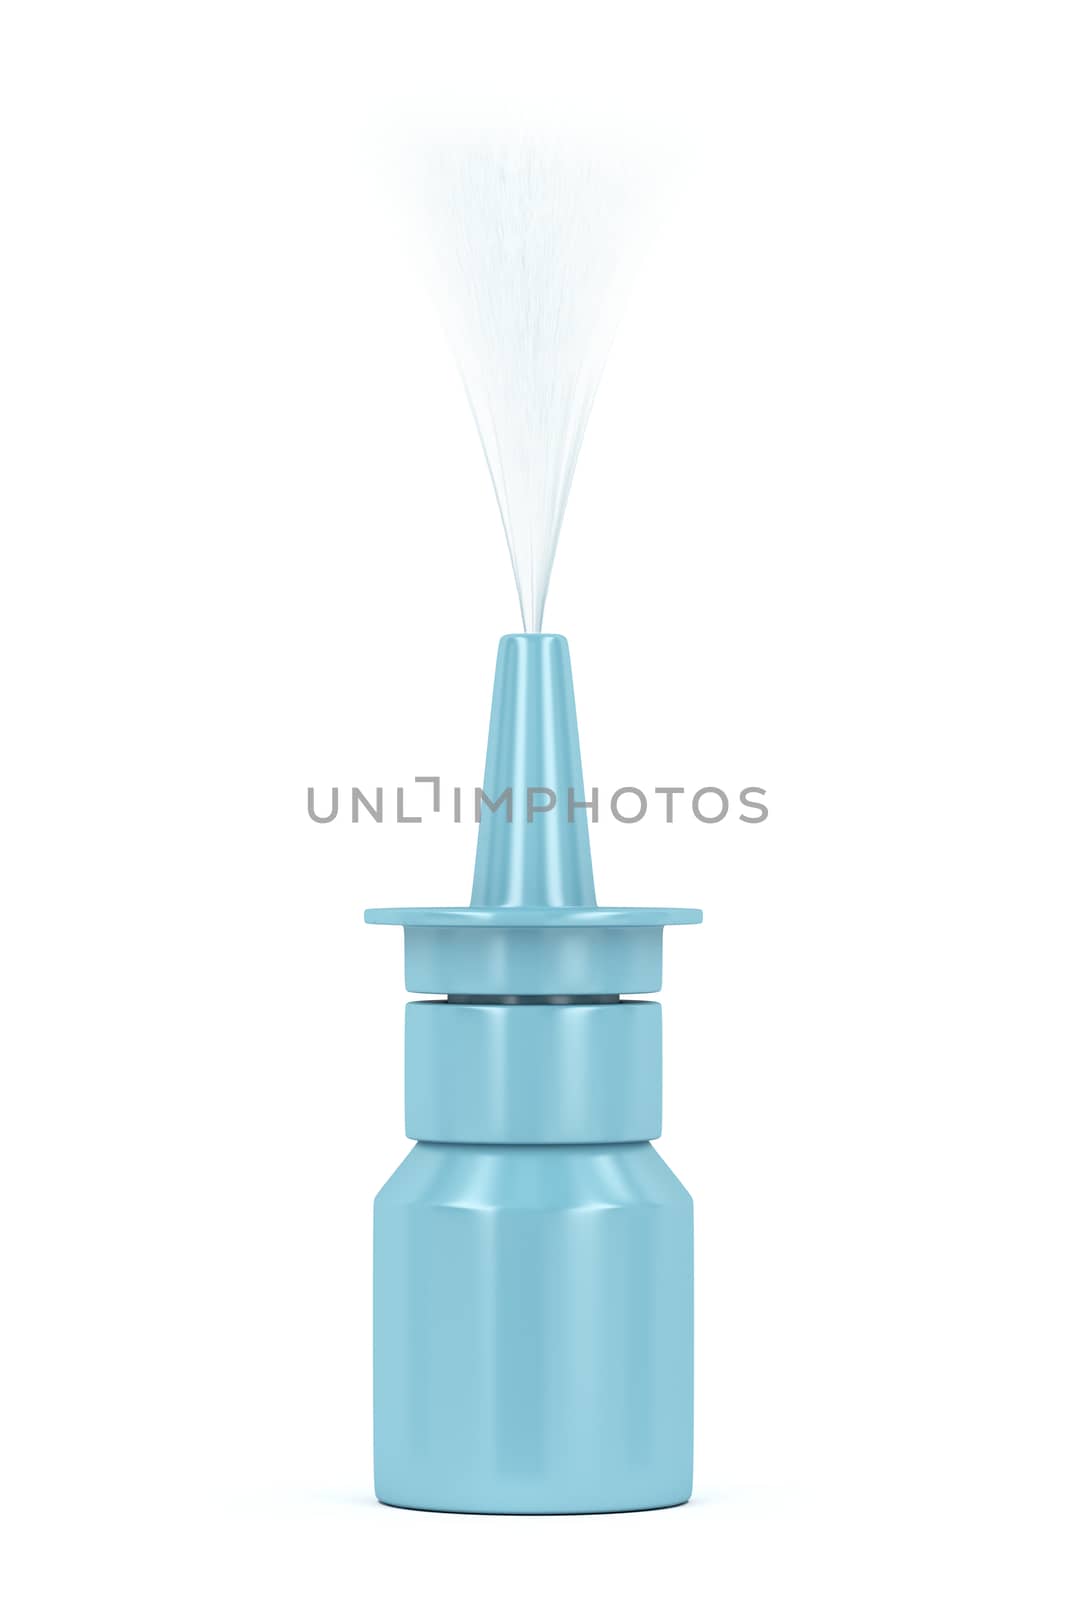 Nasal spray bottle by magraphics